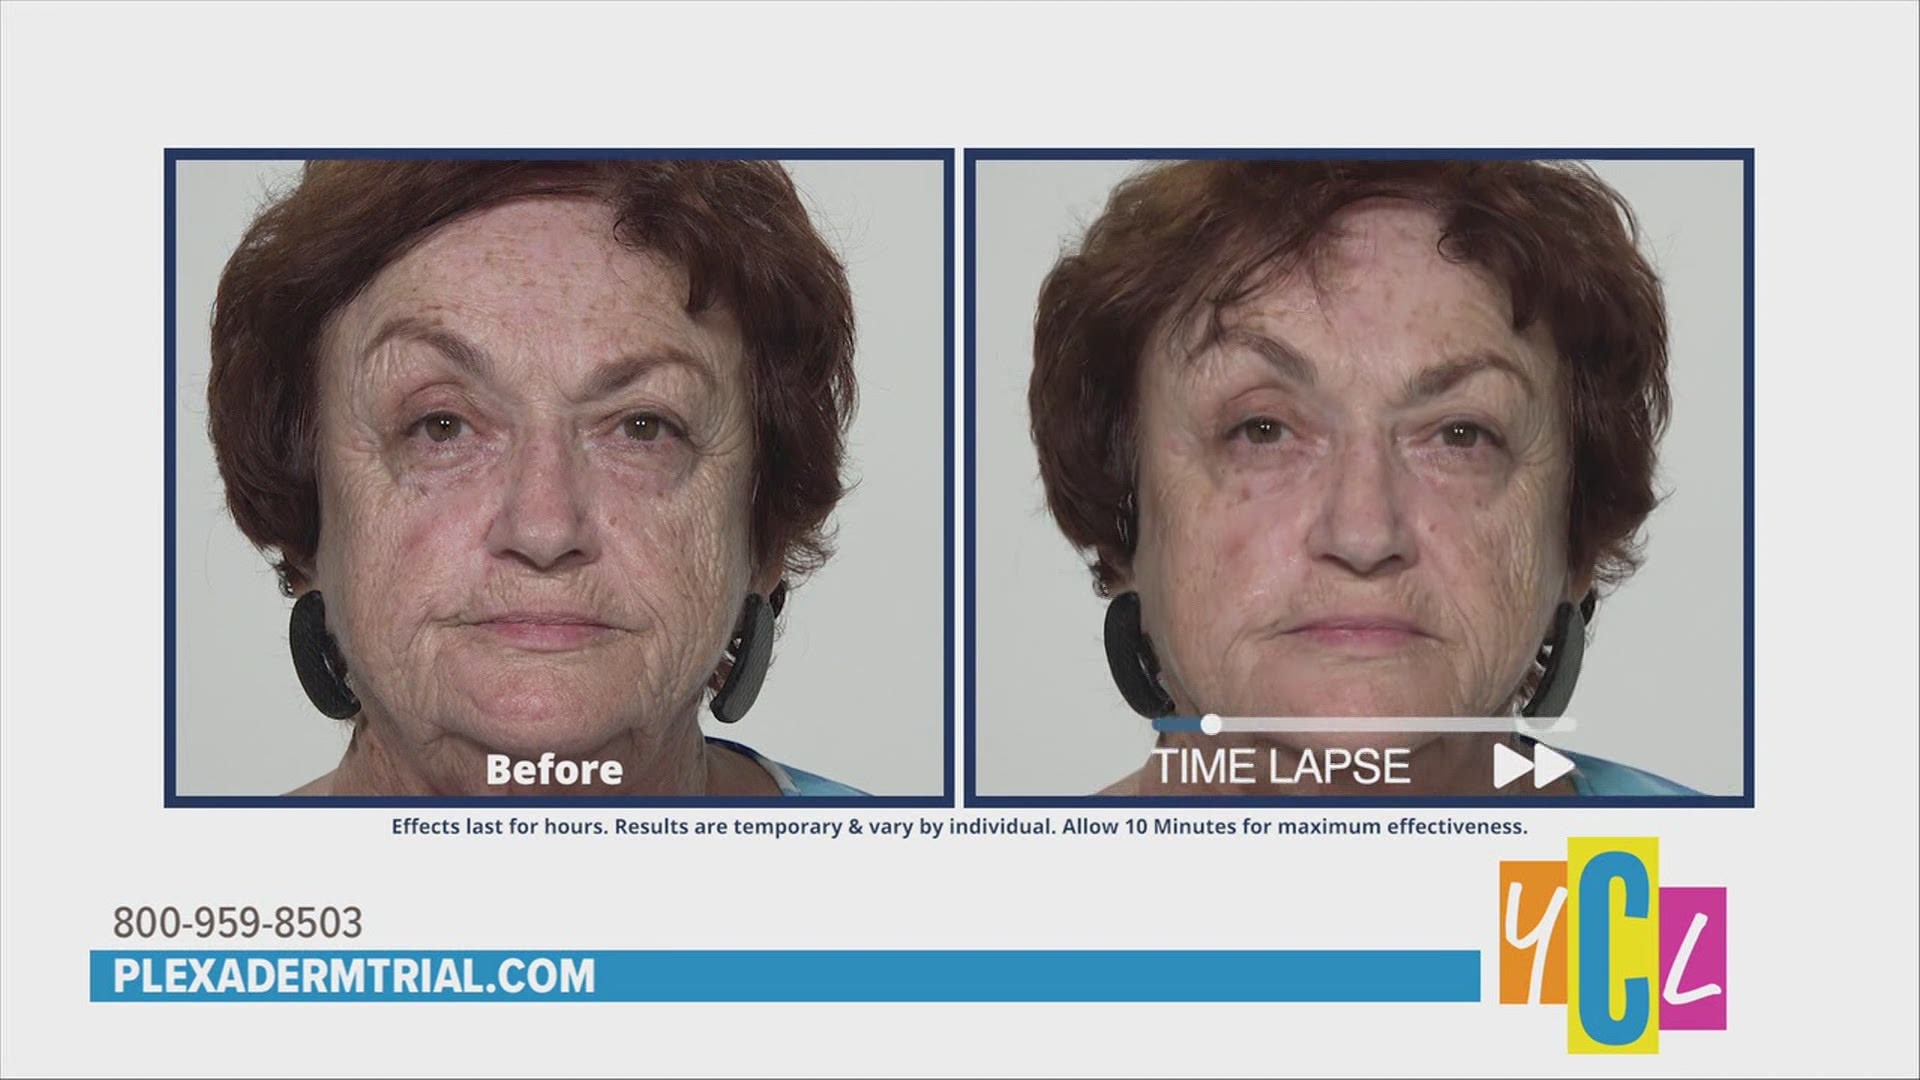 Alison Fiore share's before and after photos of skincare results of customers who've used Plexaderm. This segment paid for by True Earth Health Solutions.